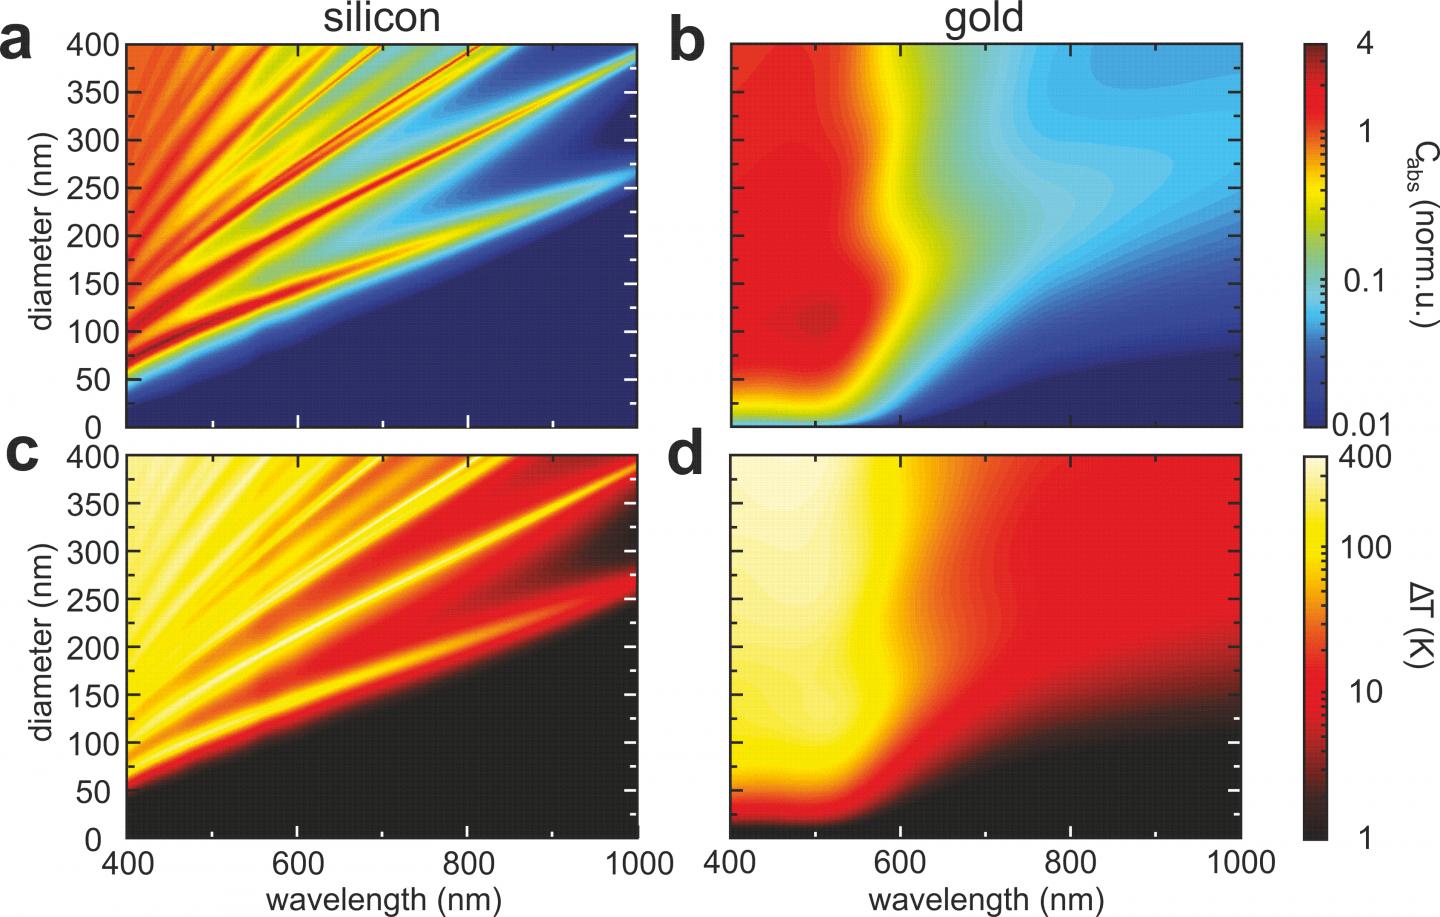 Comparing Golden and Silicon Nanoparticles: Temperature Dependence of Optical Response